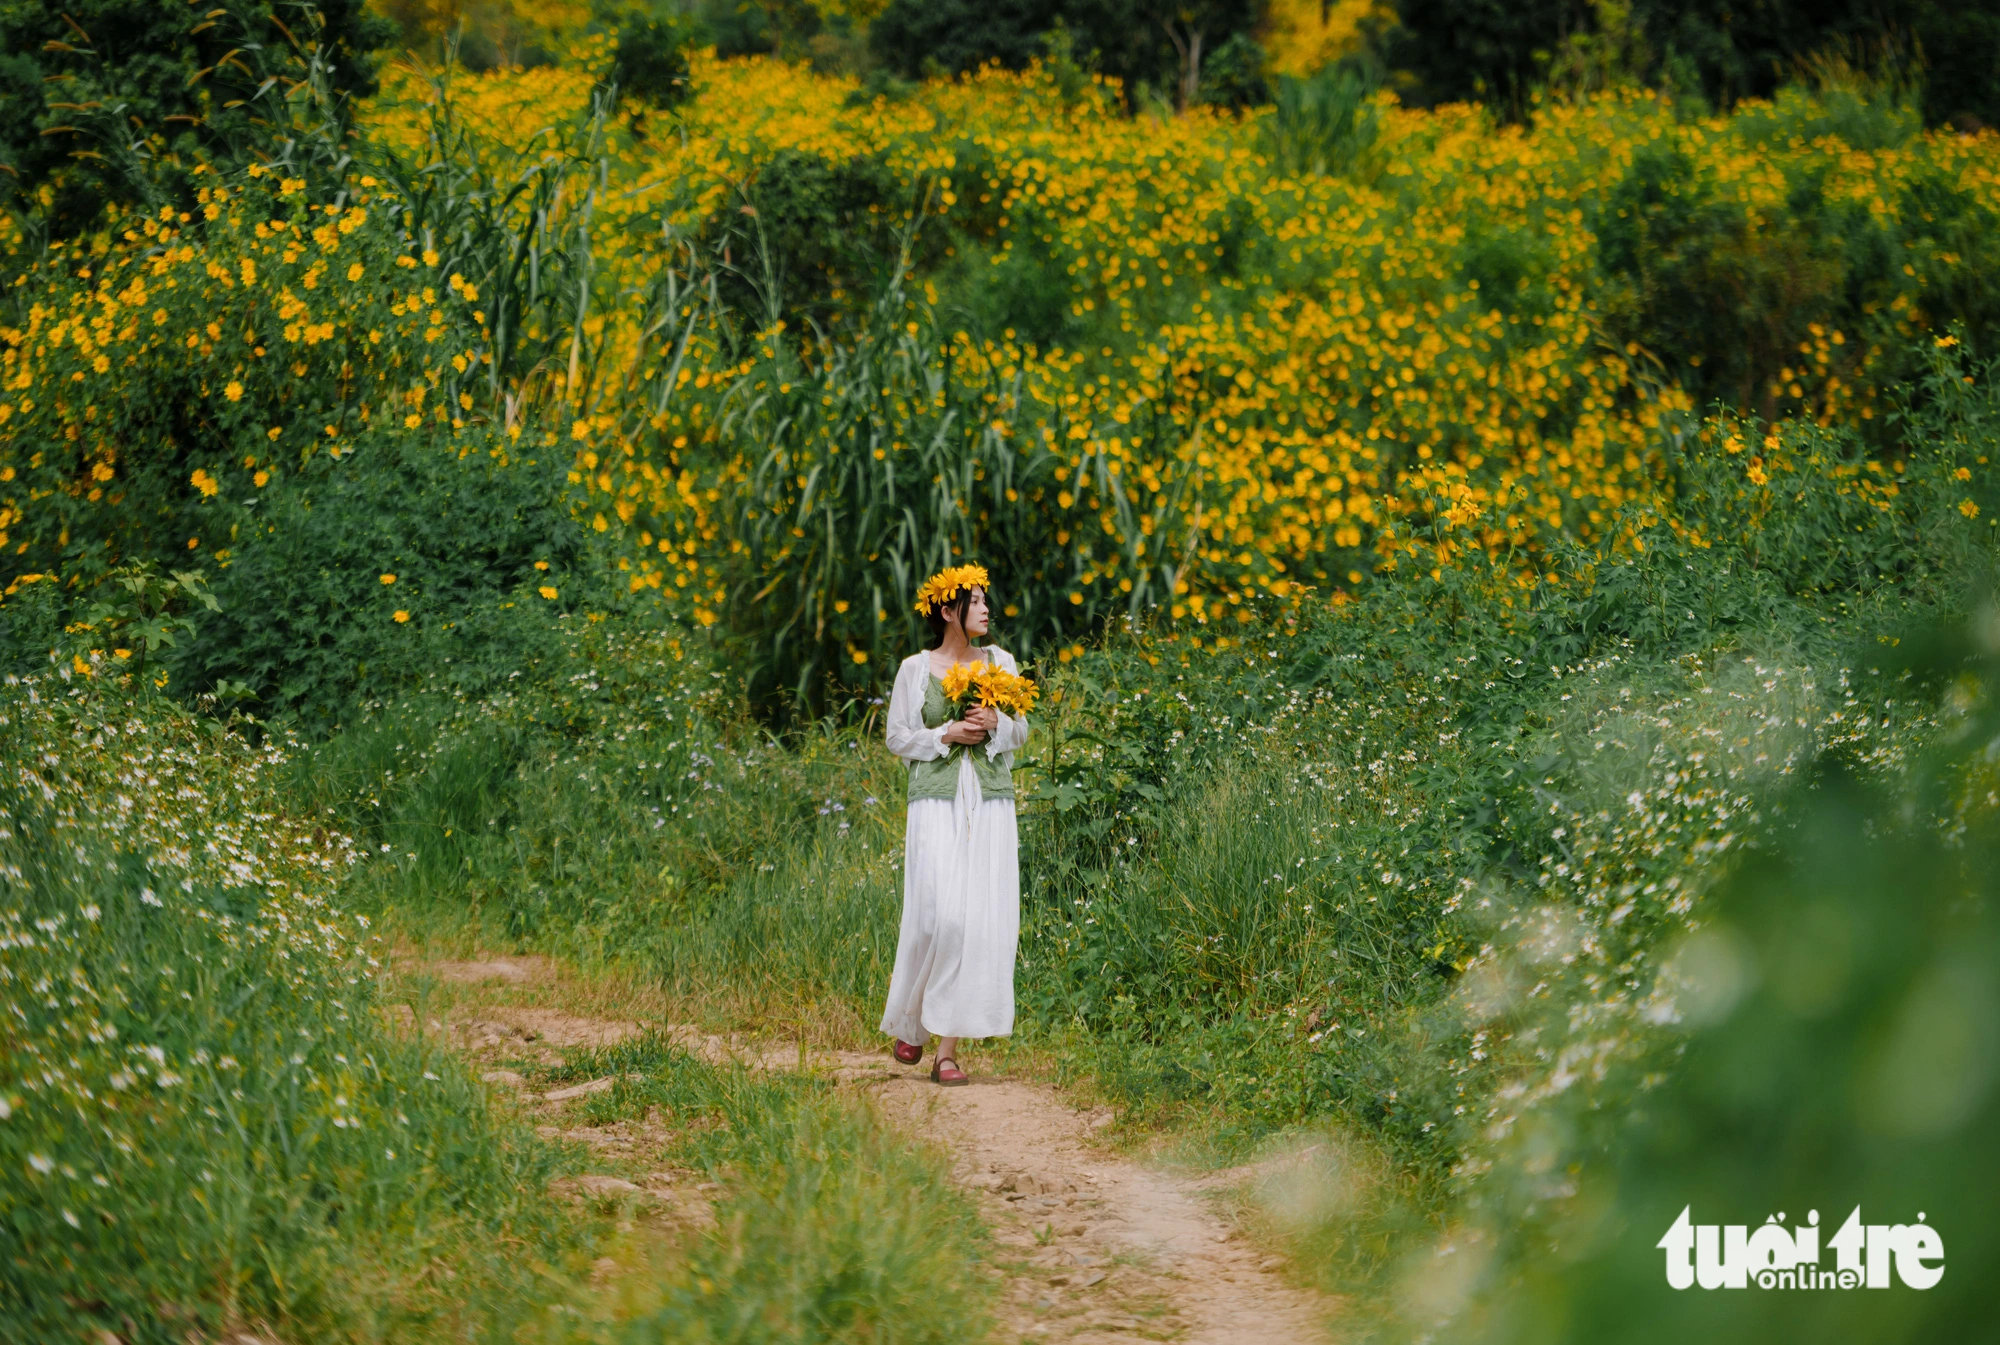 A woman poses for a photo amid bushes of wild sunflowers in Da Lat City, Lam Dong Province, Vietnam. Photo: Quang Da Lat / Tuoi Tre